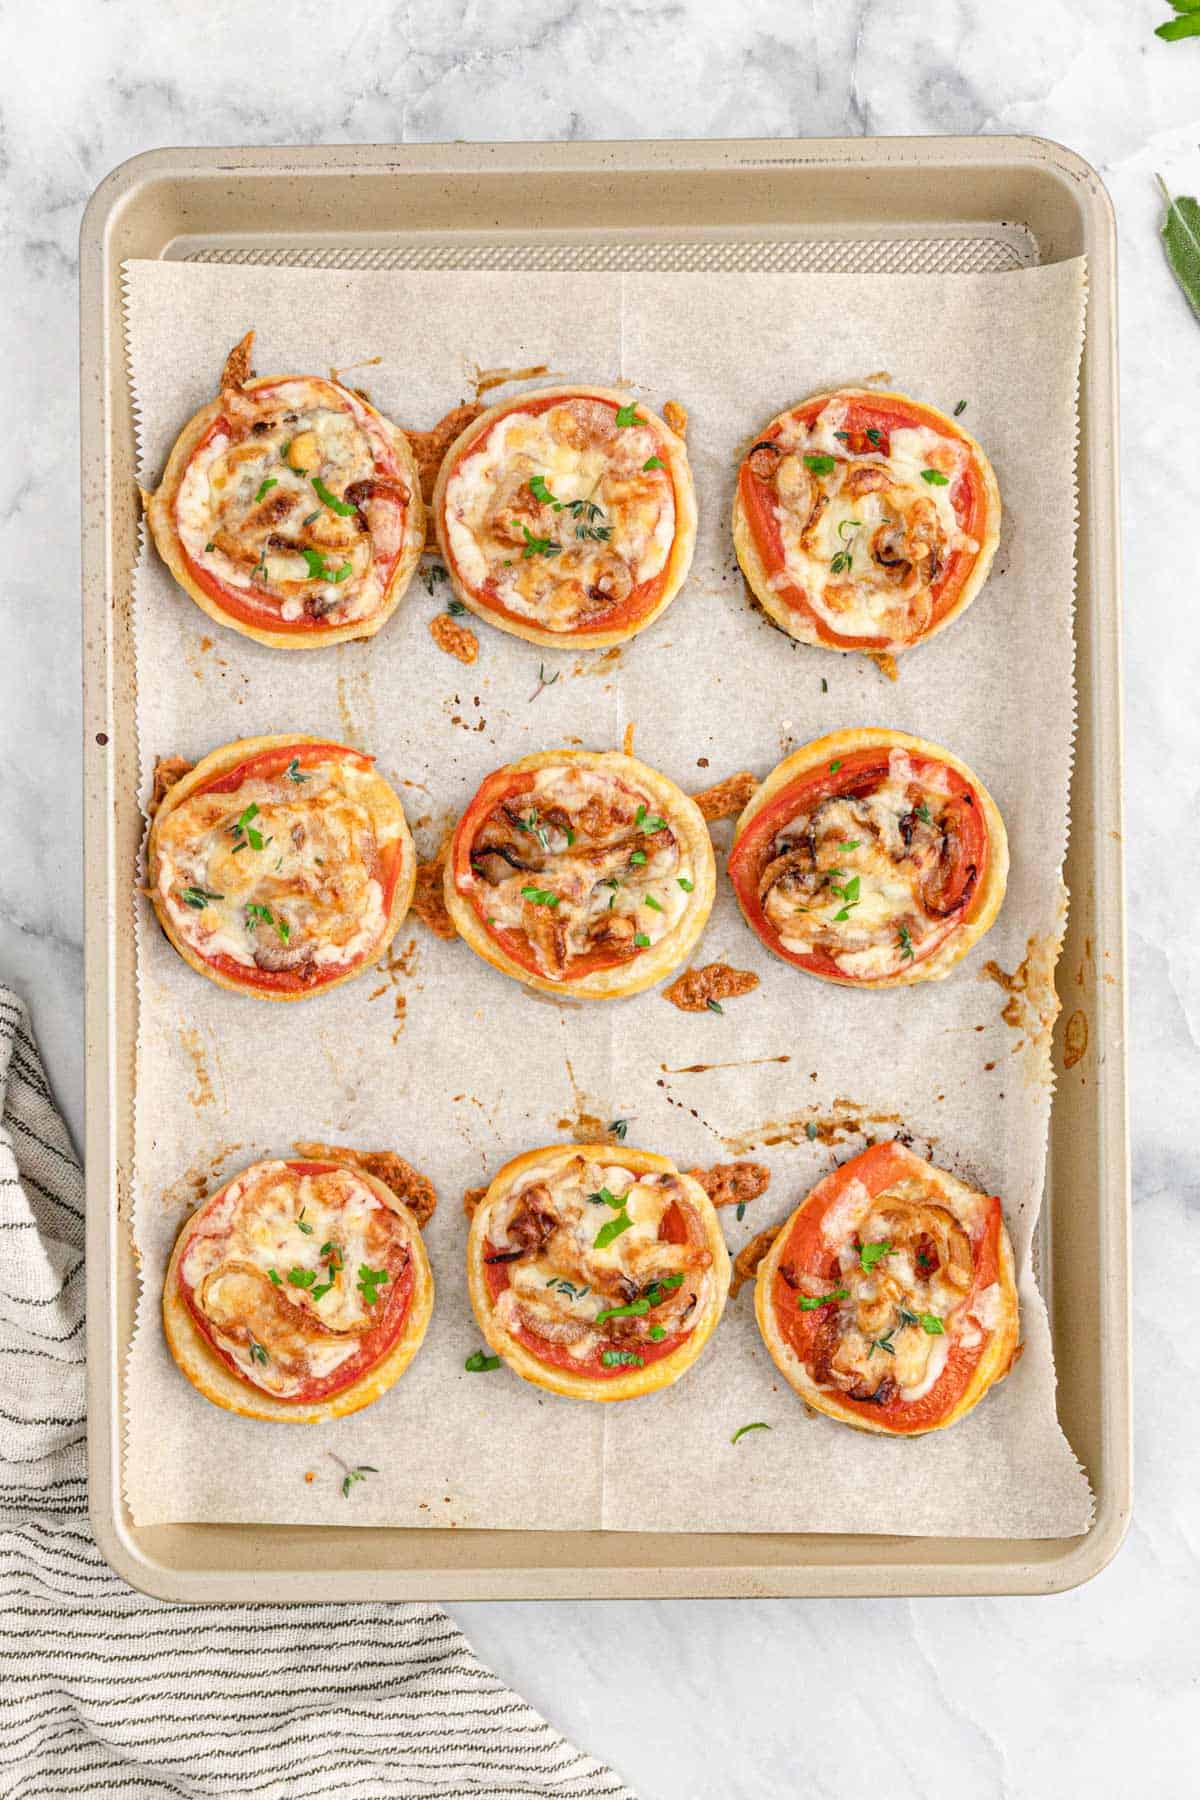 A tray of baked tomato tarts on puff pastry on the table.